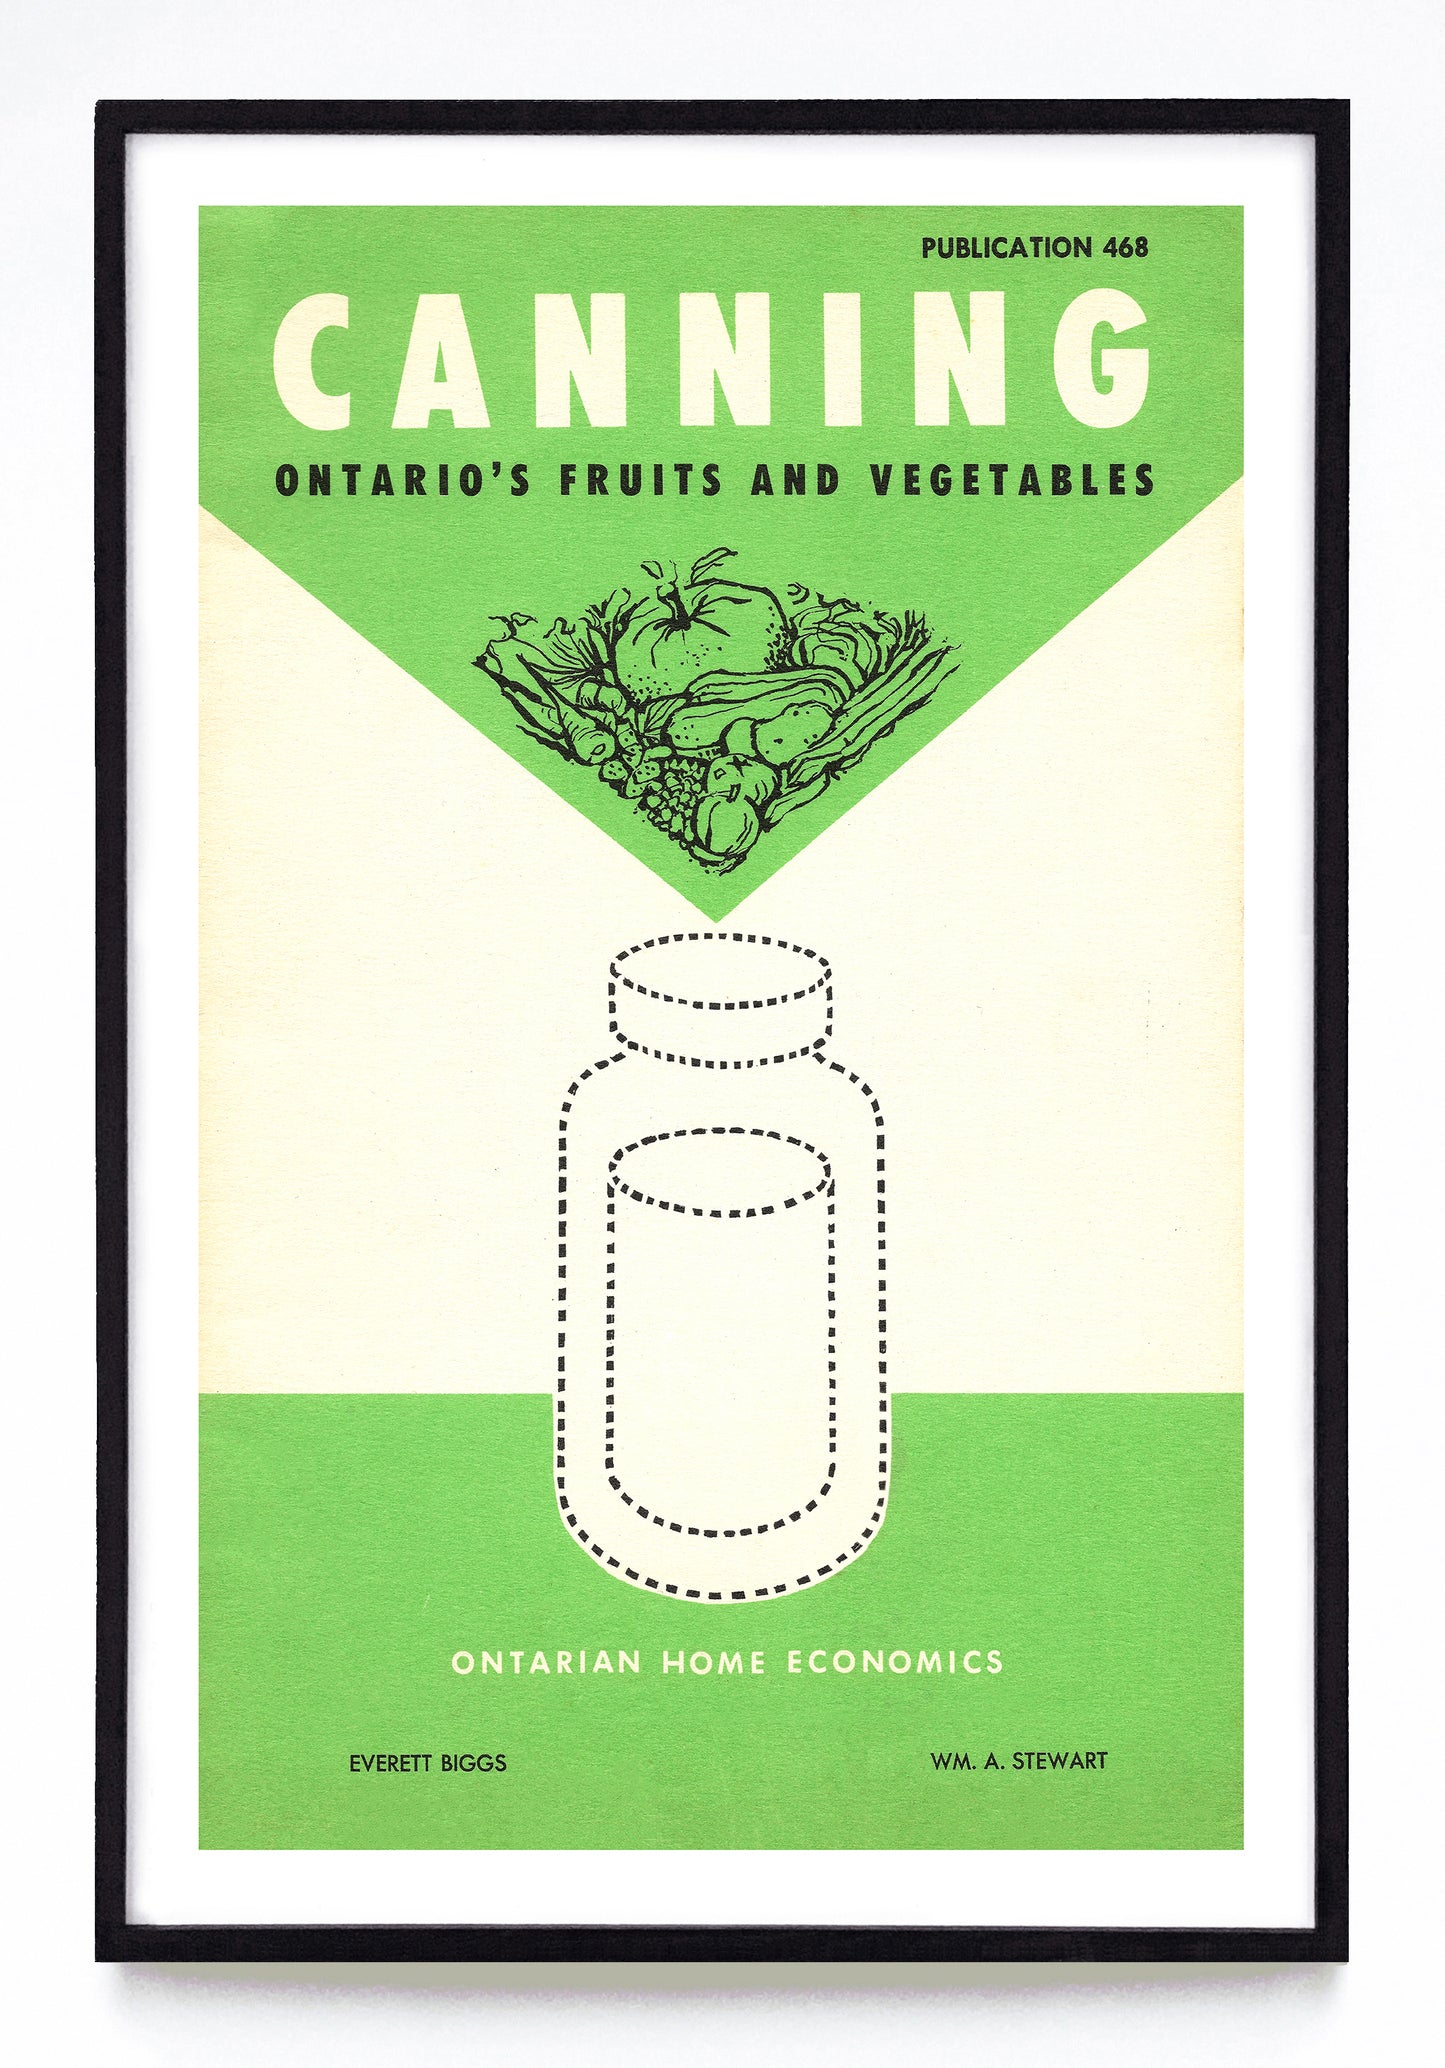 "Canning Ontario's Fruits and Vegetables" print (1965)